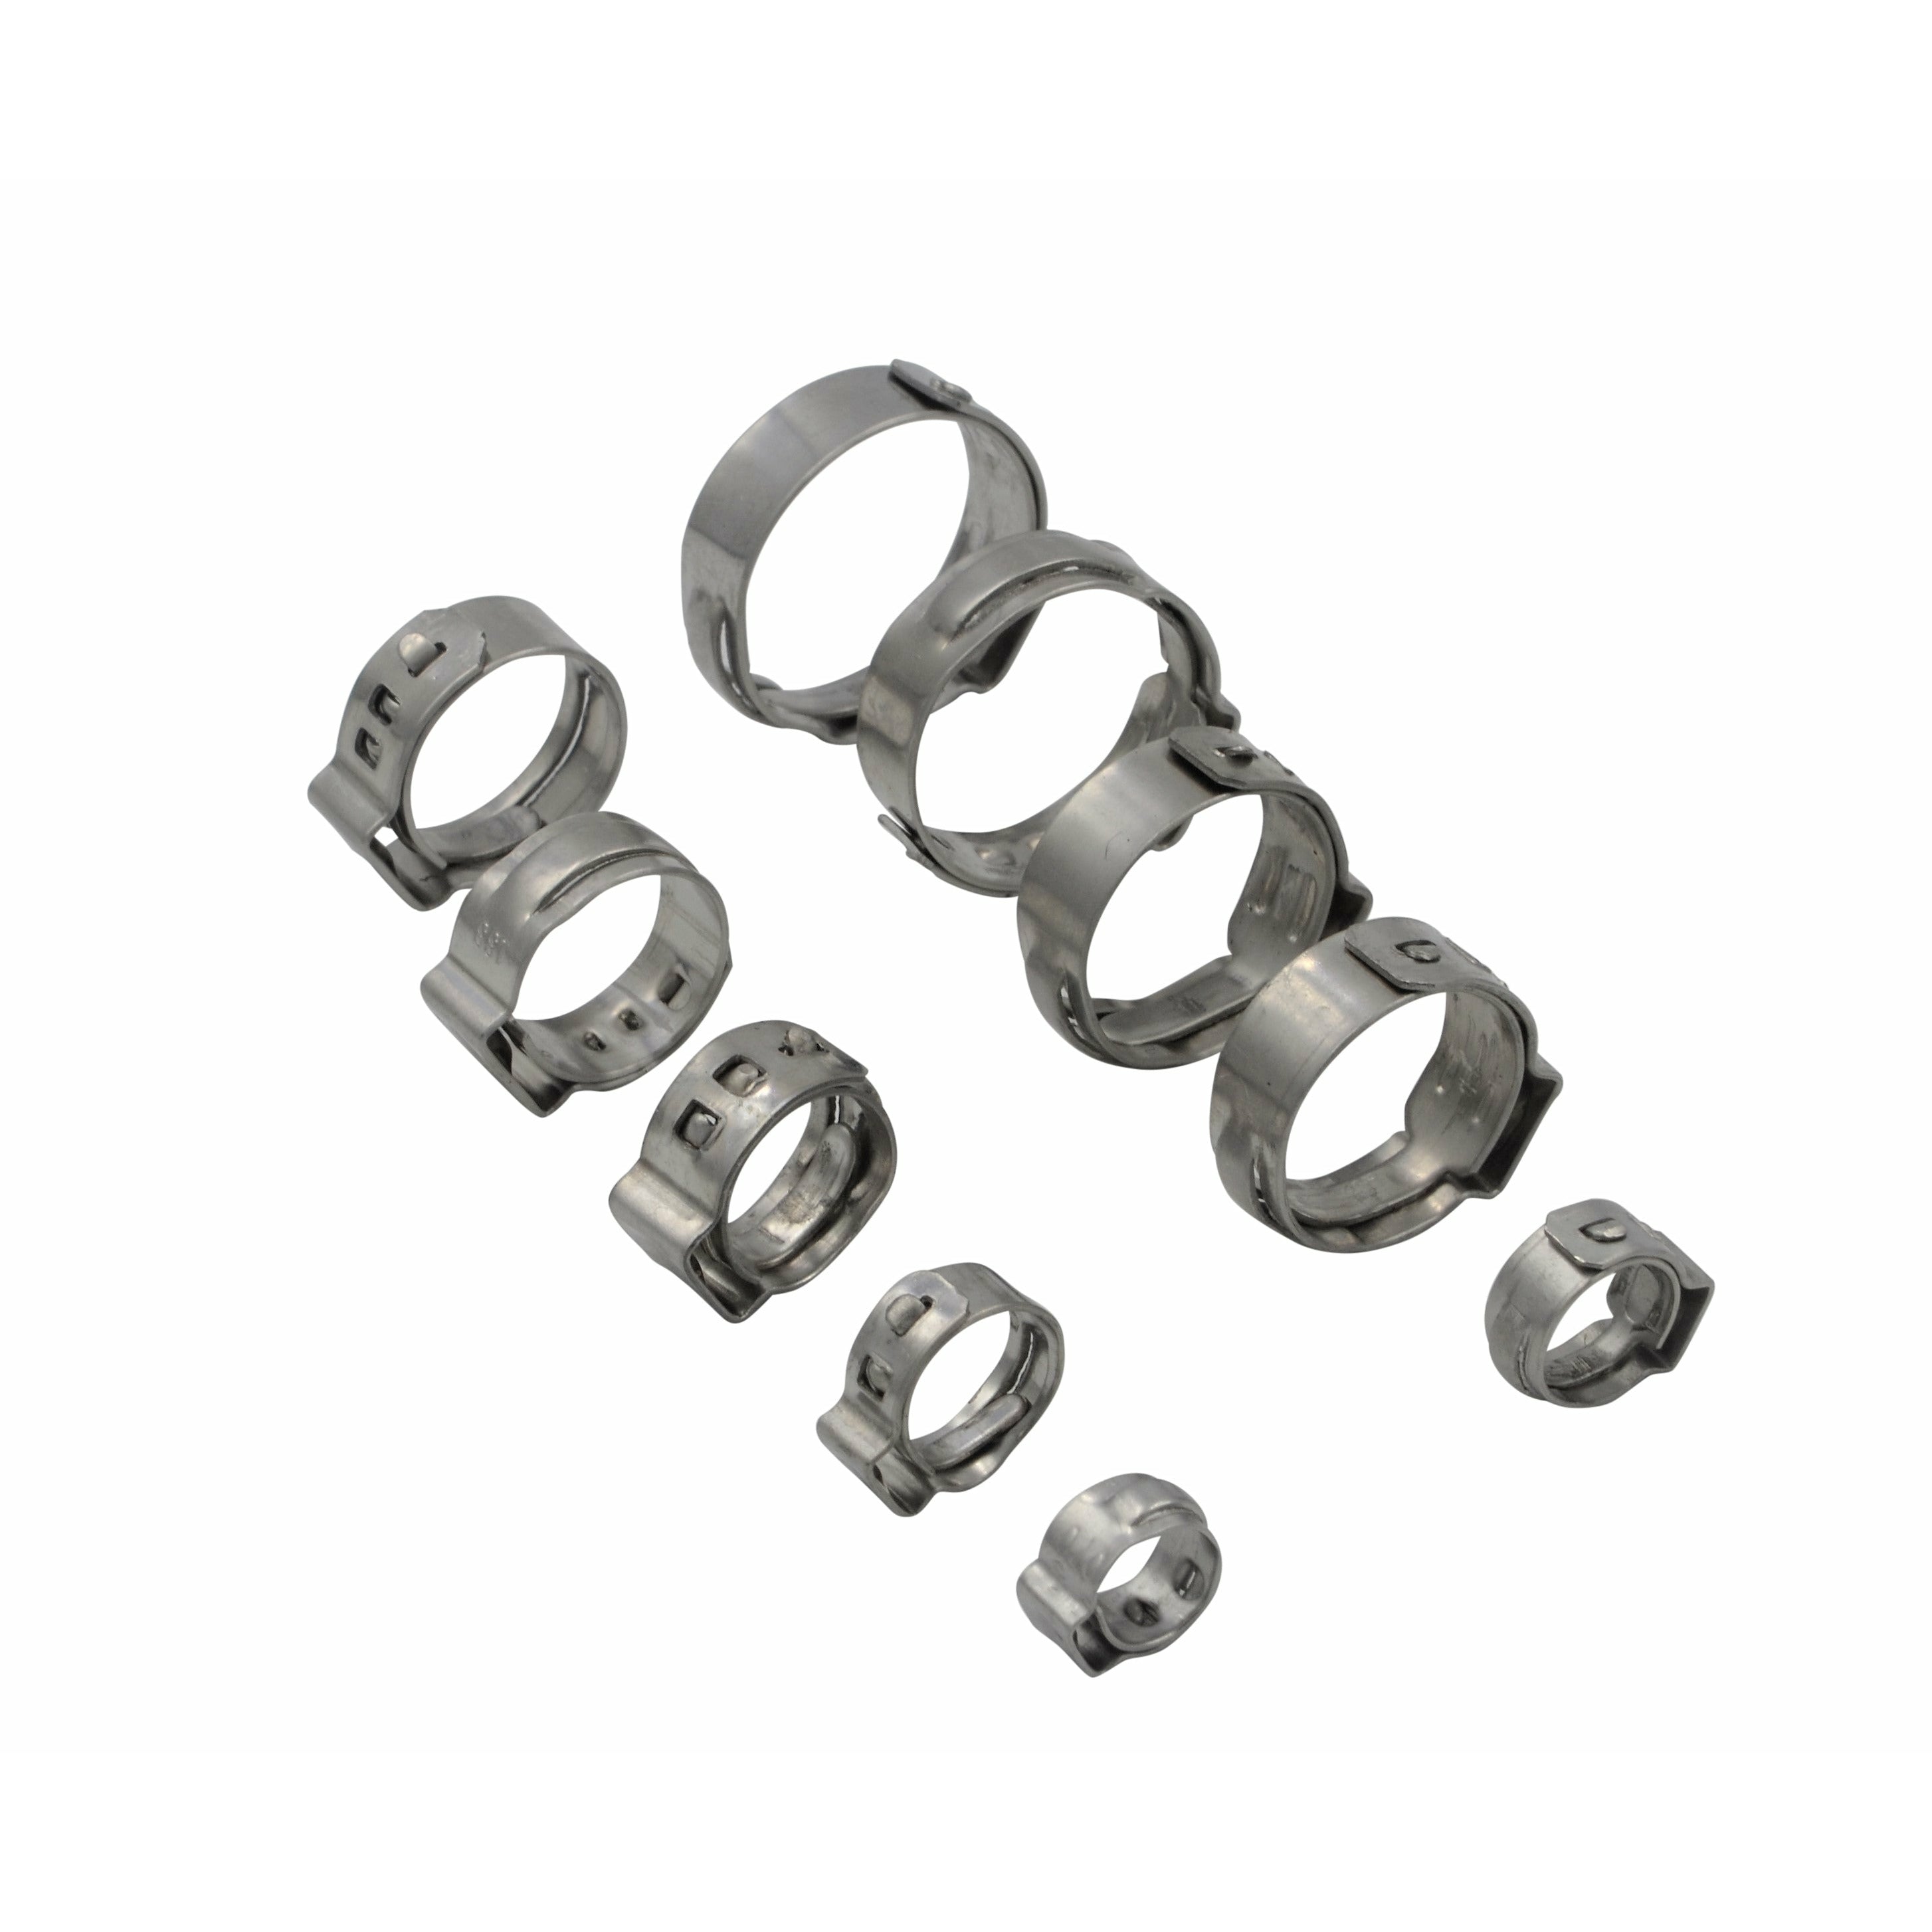 100 Piece 304 Stainless Steel 9.6-11.3mm Ear Hose Clamp Grab Kit Assortment